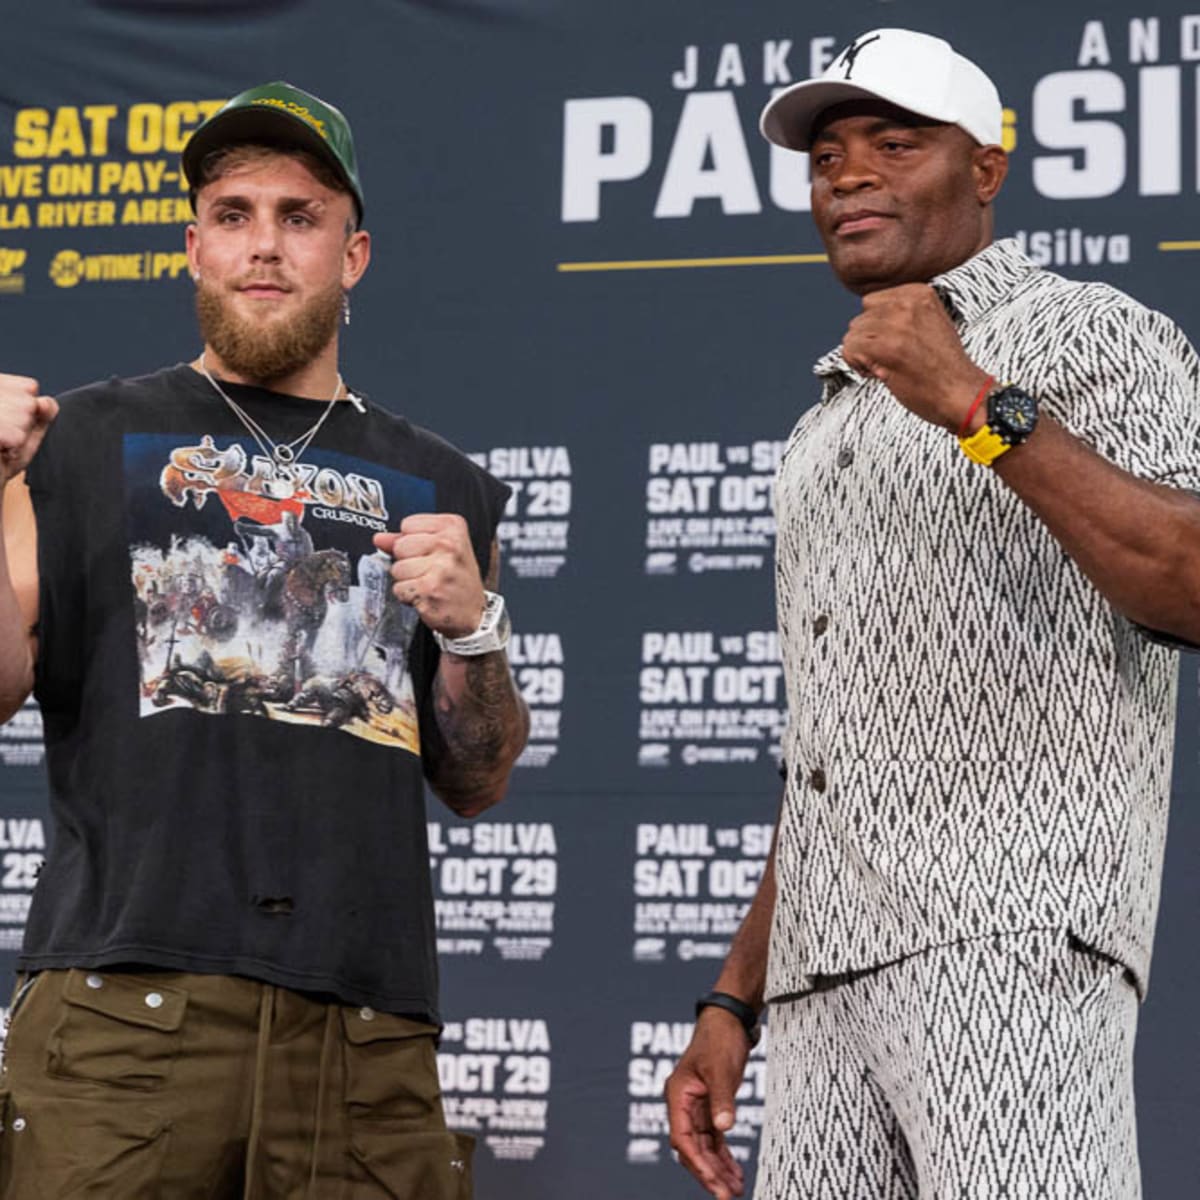 Anderson Silva Jake Paul boxing match not about winning or losing